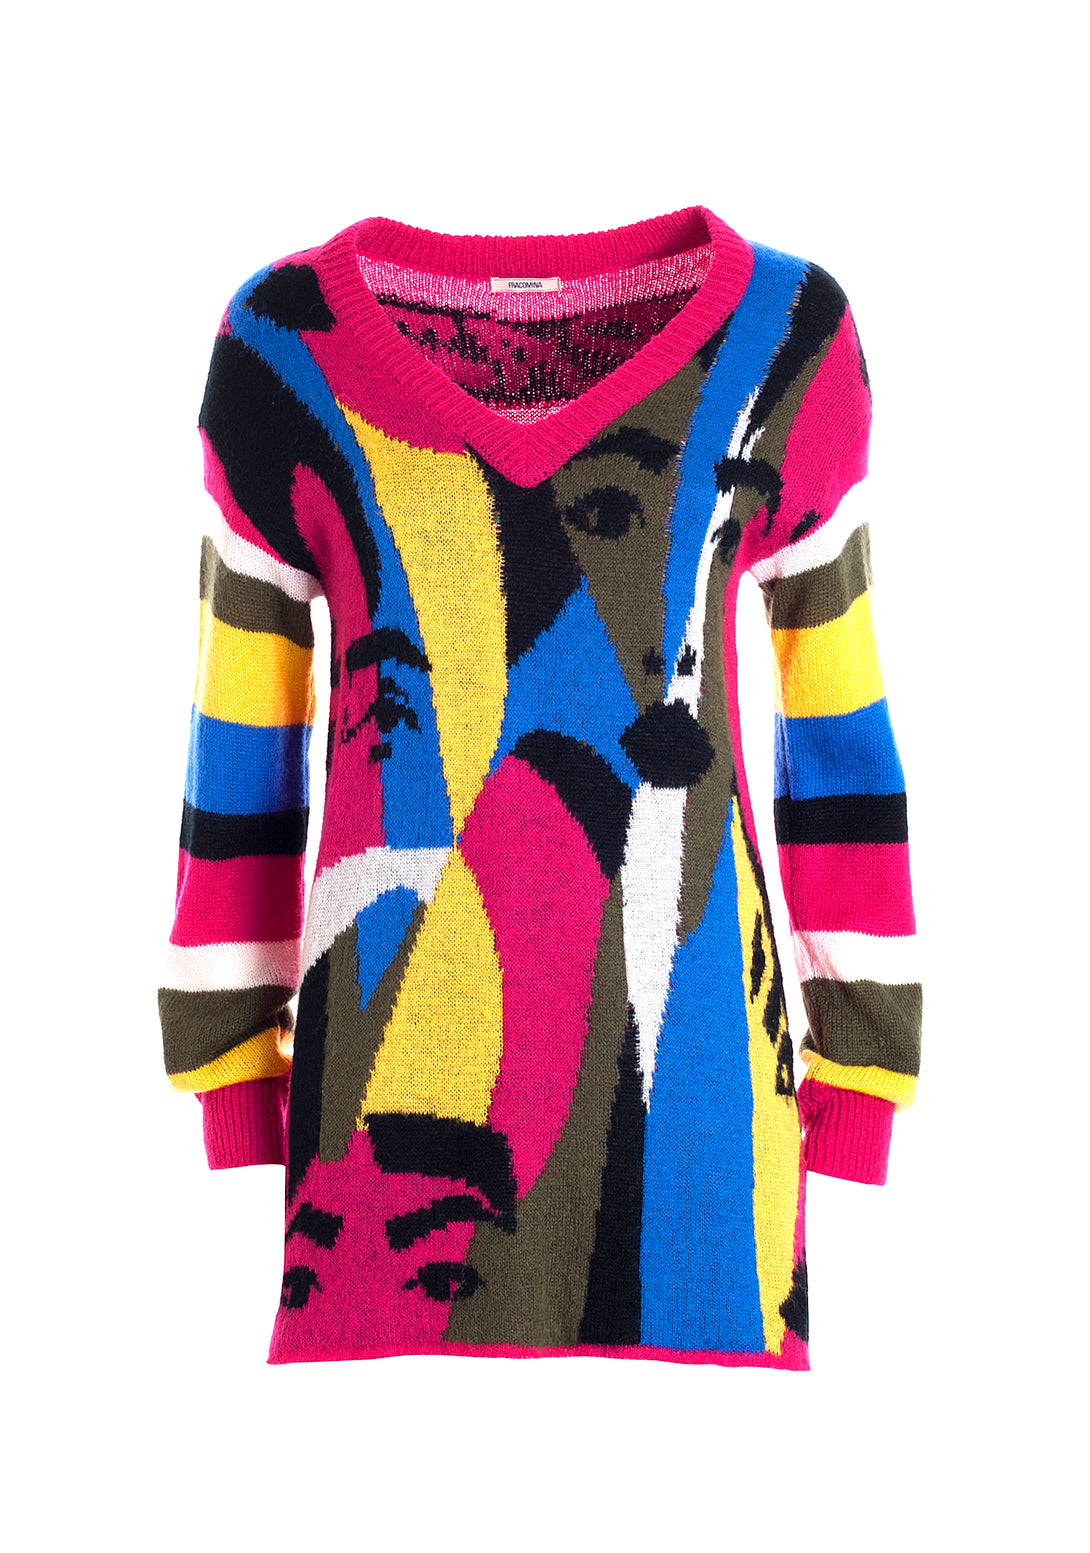 Knitwear over fit, long, with multicolor jacquard effect